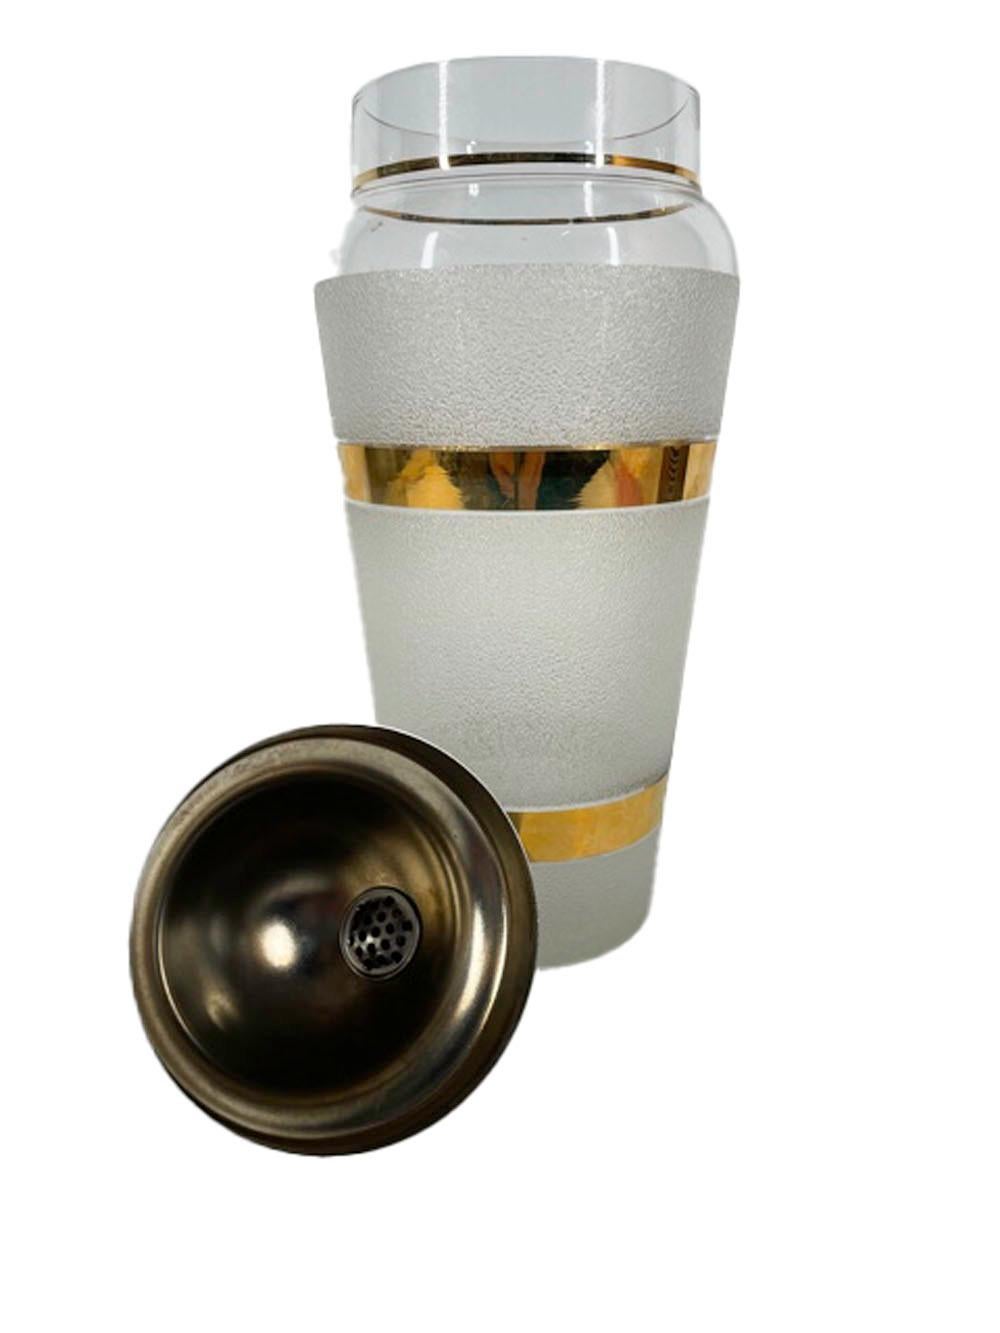 American Vintage Cocktail Shaker Set with Gold Bands and Textured Frosted Surface For Sale